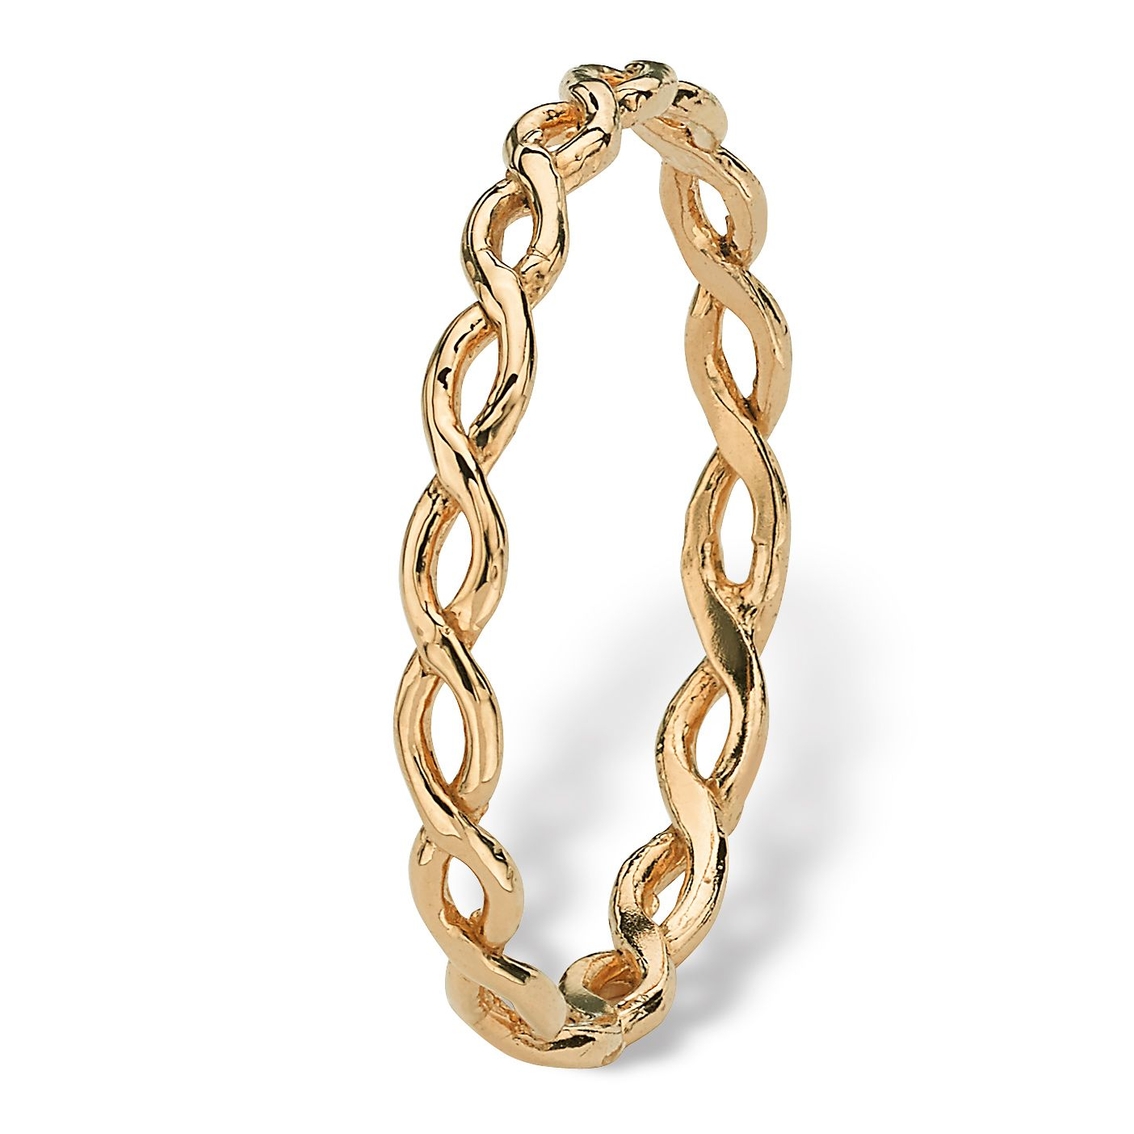 Braided Twist Ring in 10k Yellow Gold - Image 2 of 5